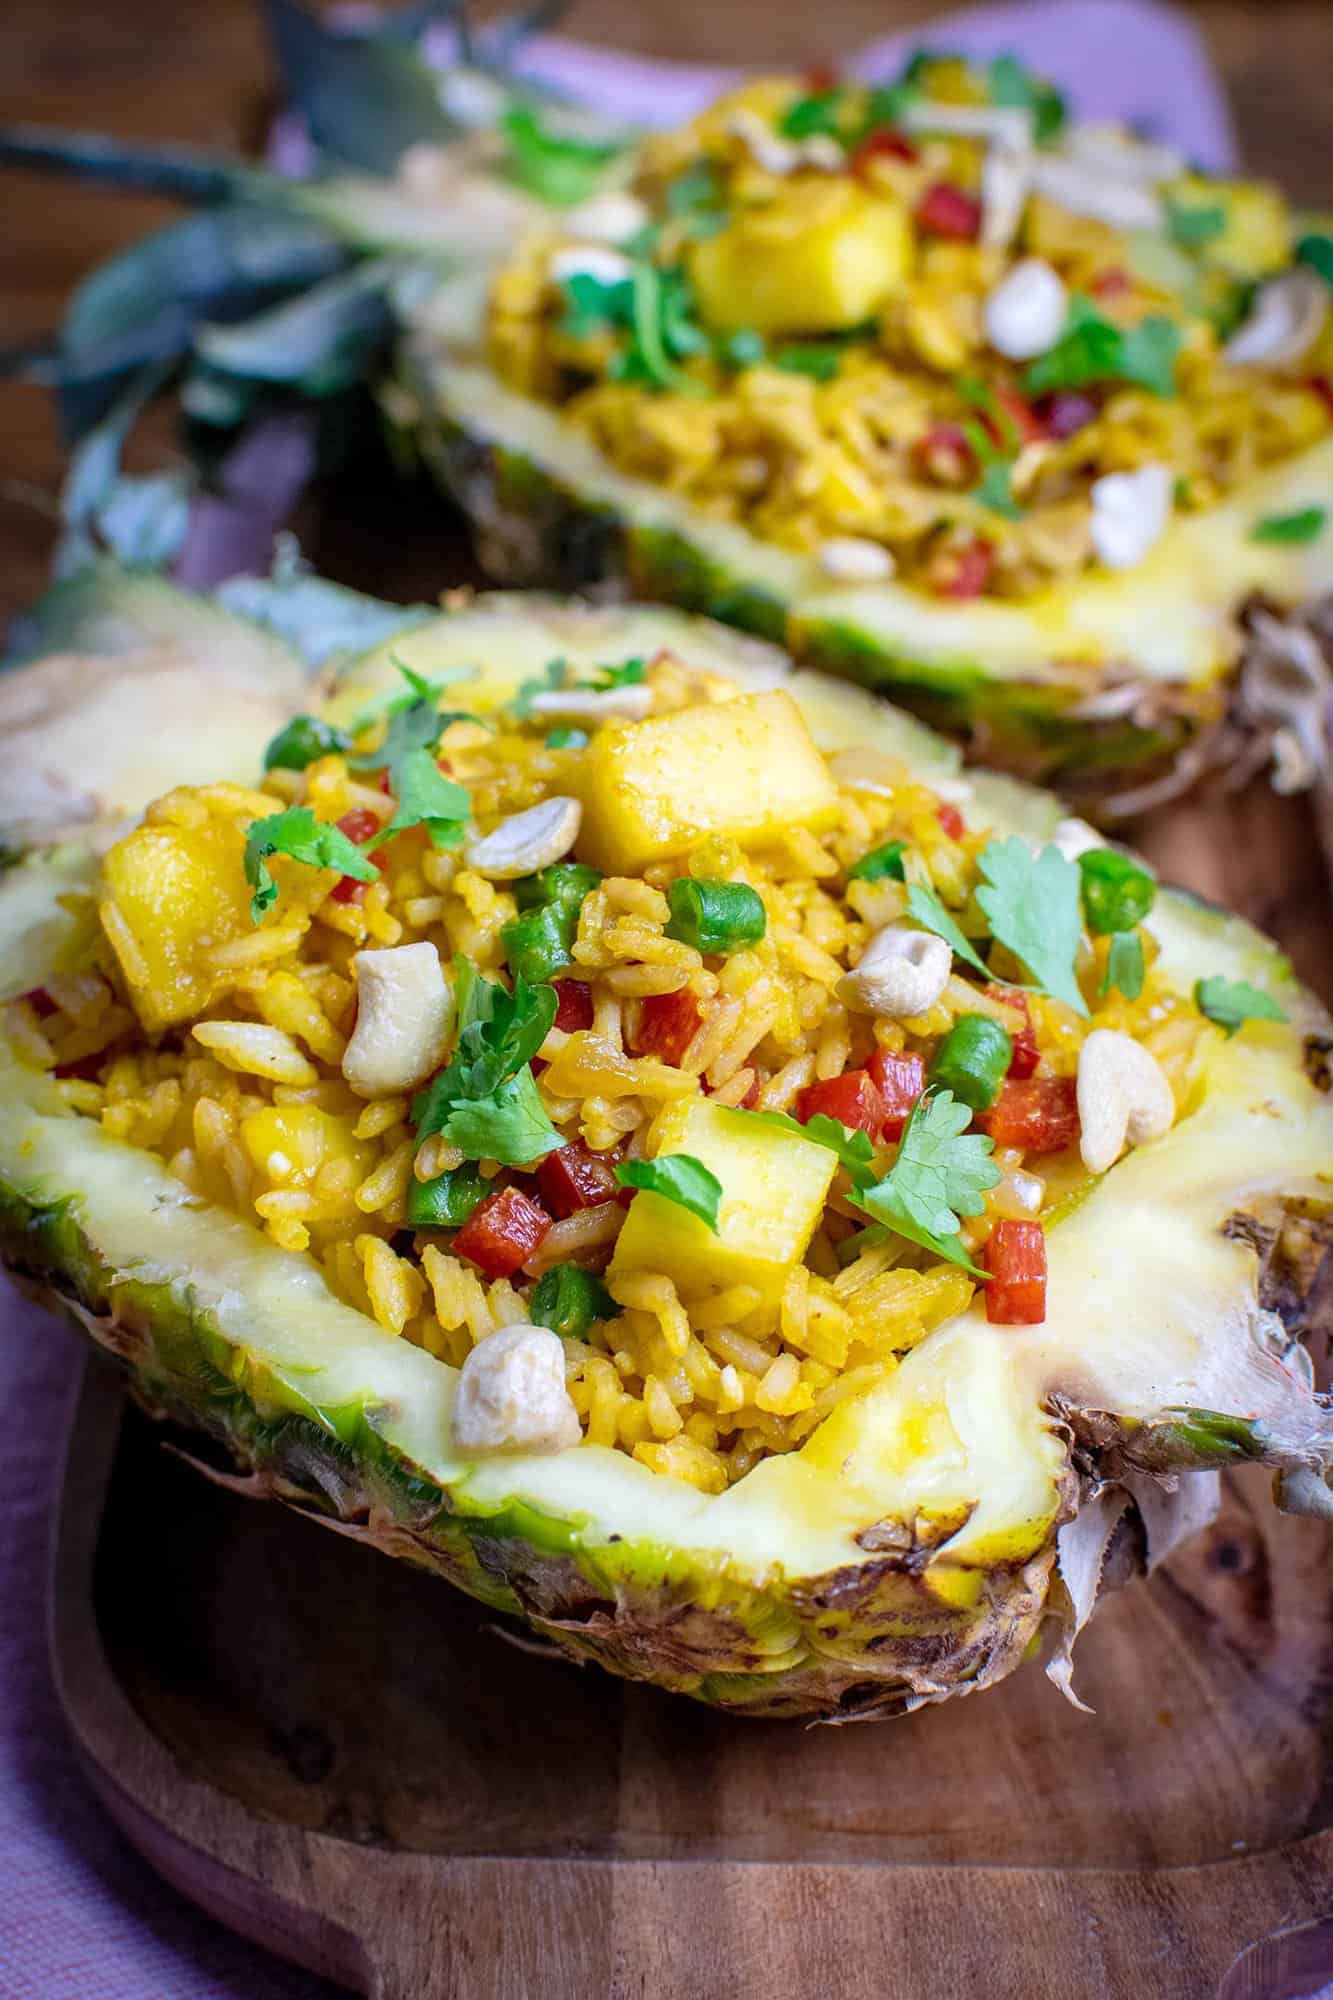 Two hollowed out pineapples filled with Vegan Pineapple Fried rice